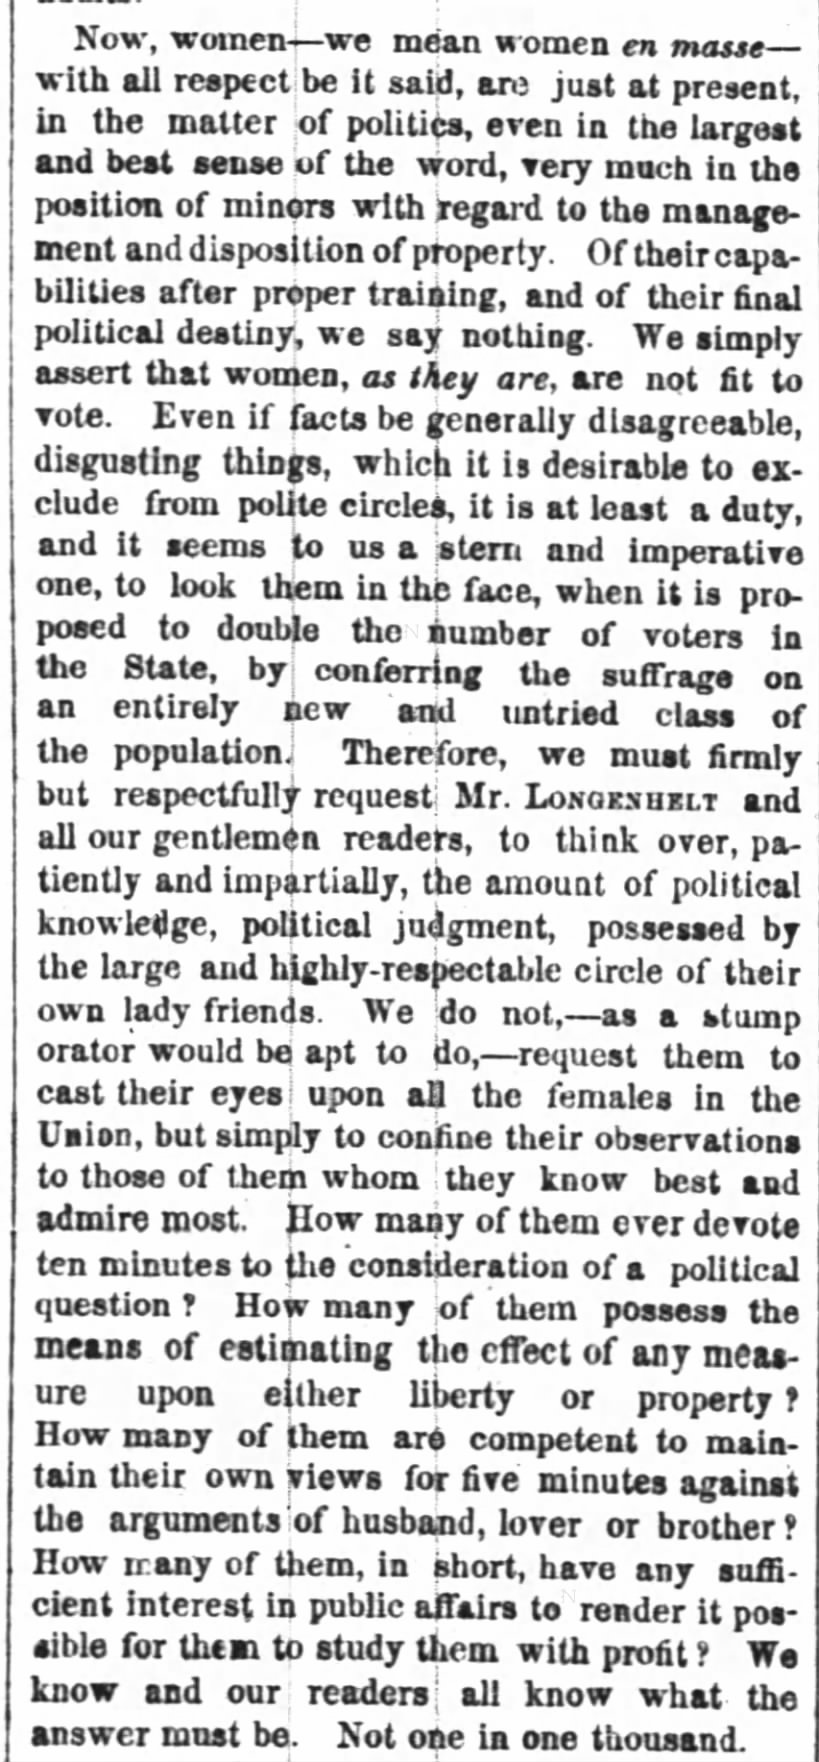 "...women, as they are, are not fit to vote." (1859)